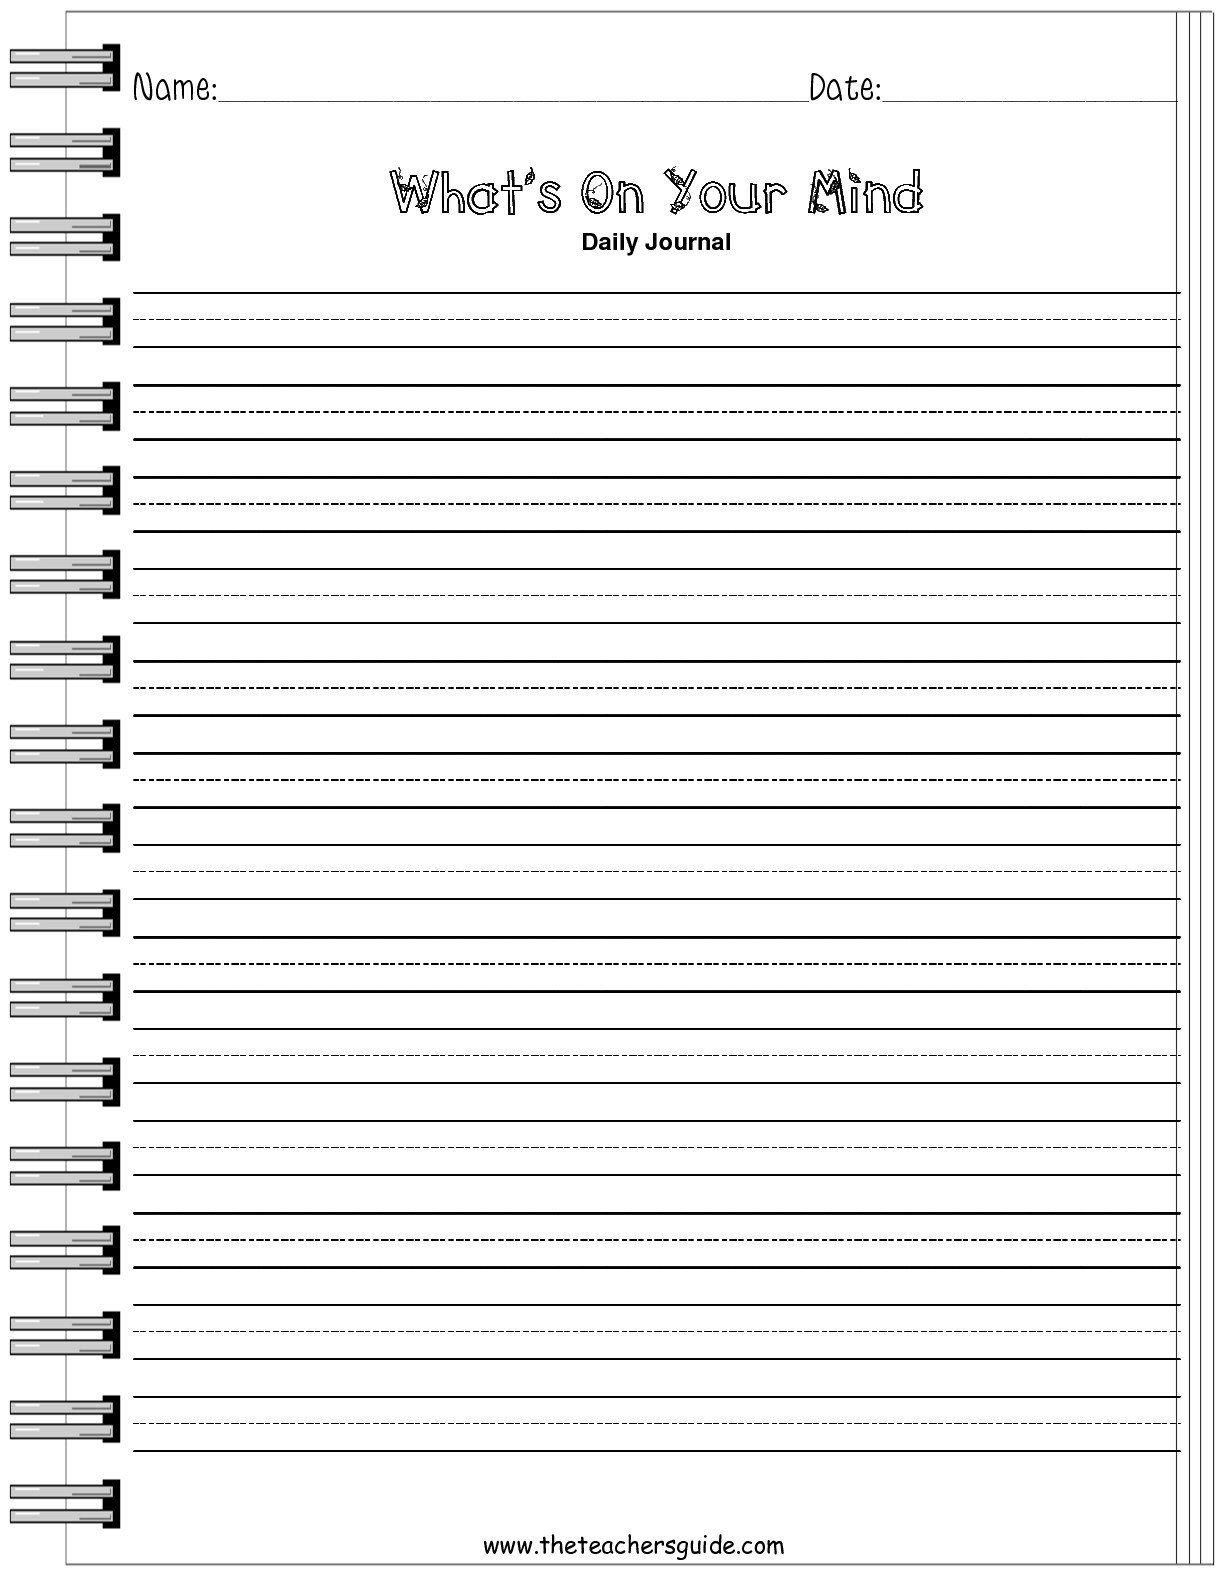 Writing Prompt Worksheets from The Teacher s Guide